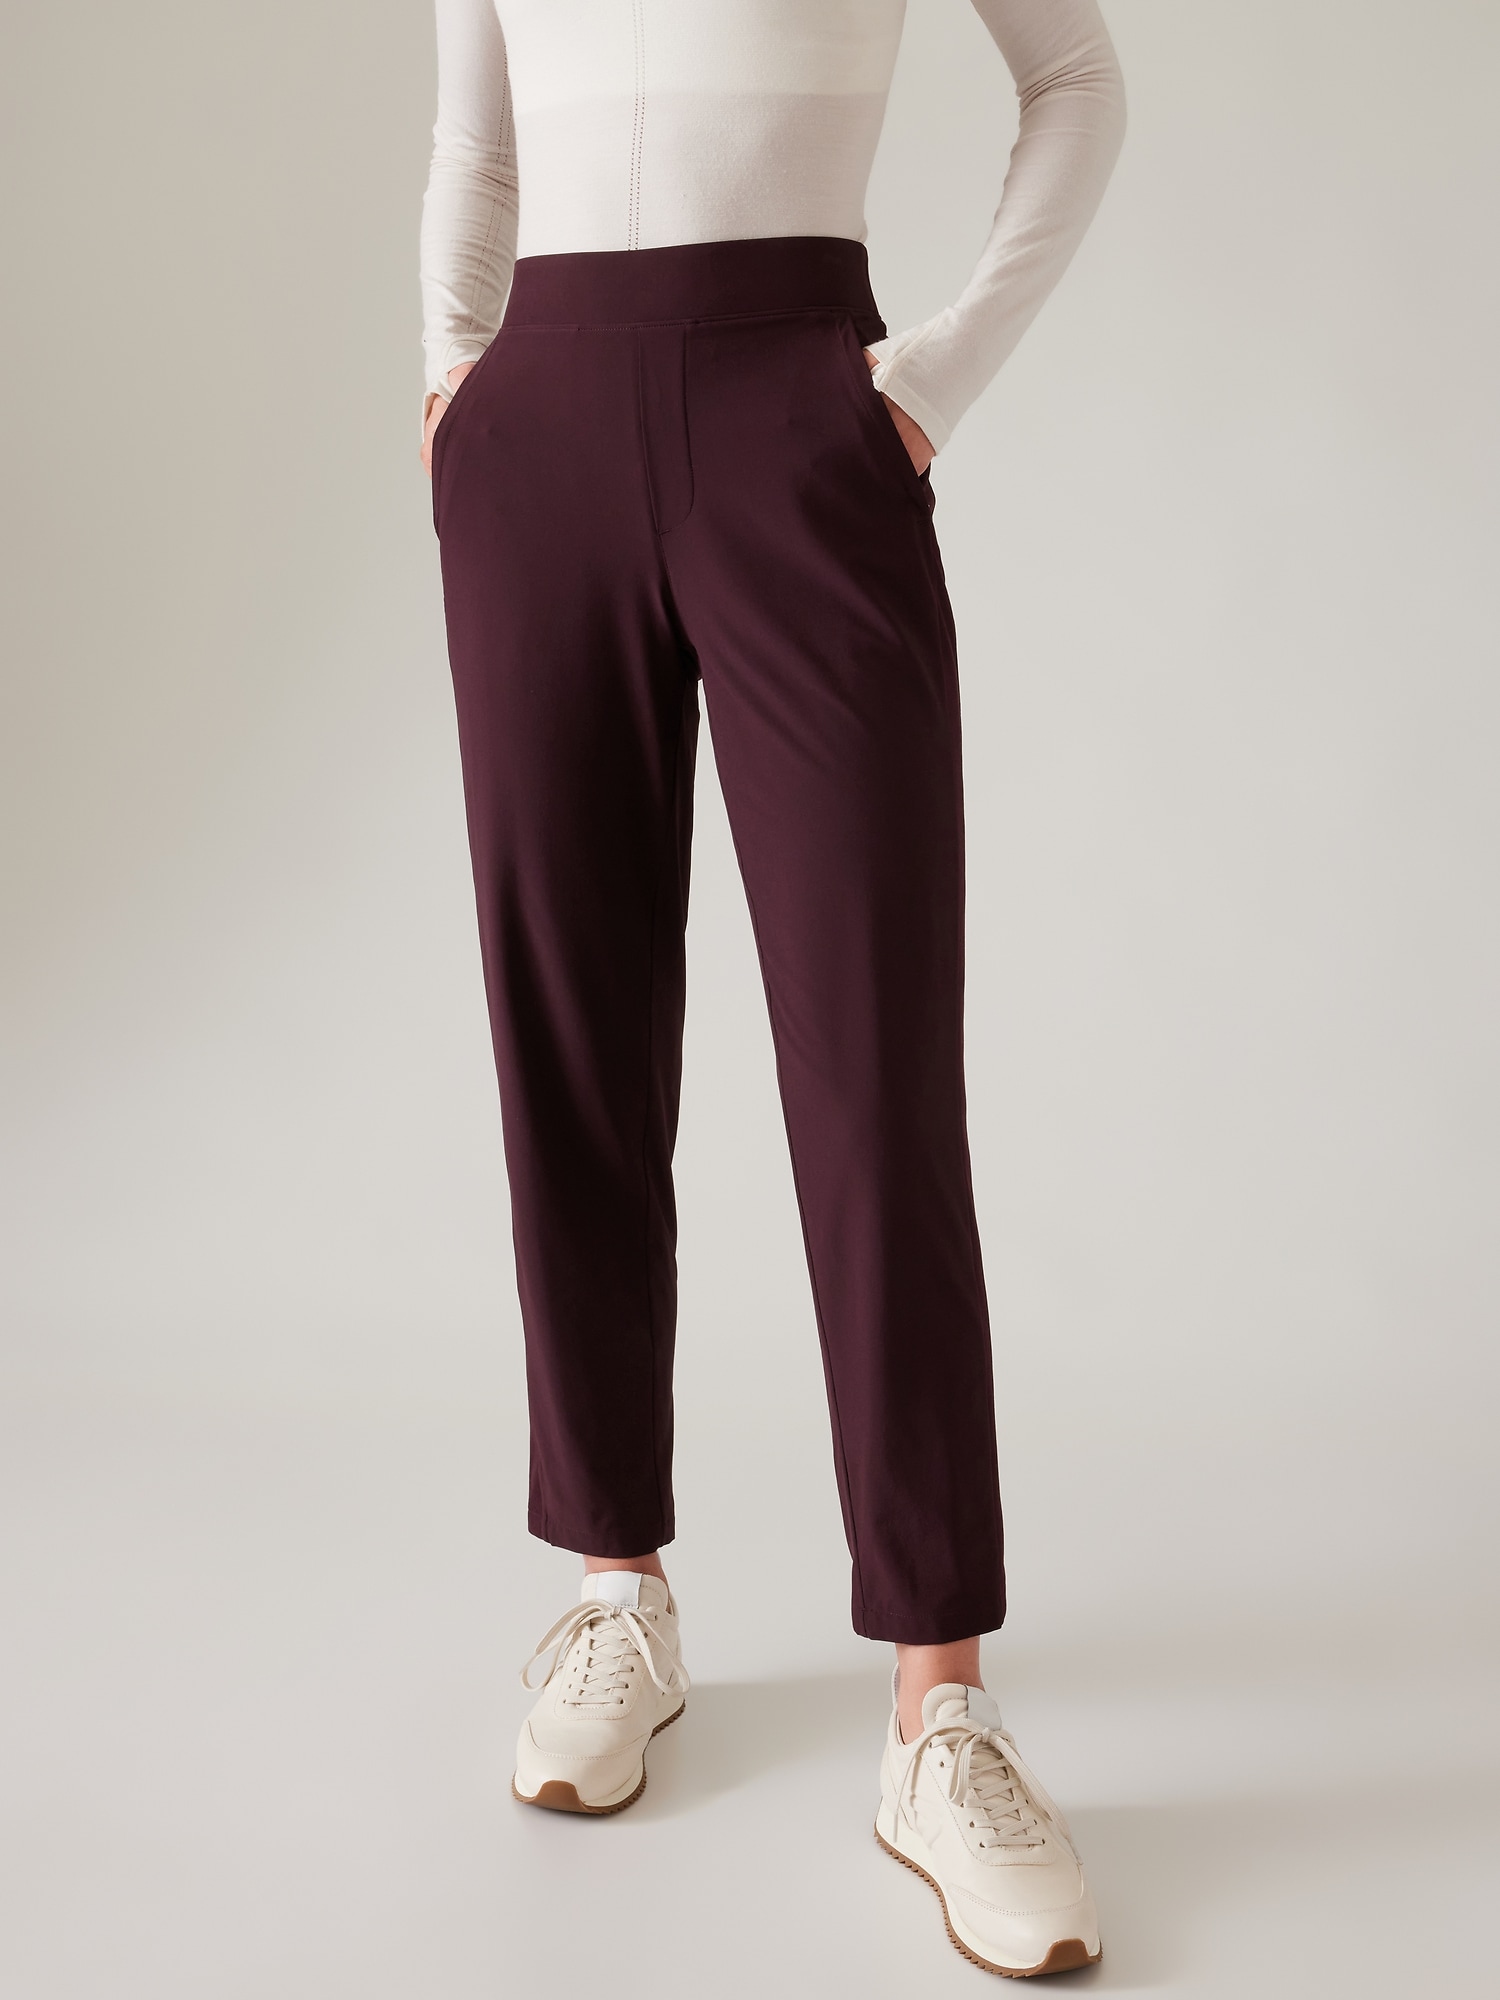 Womens Pants Woven Pleated Wide Leg Split Casual Paper Bag Flowy Trousers  Belt Lined Stretch Ladies From Bertinafara, $23.77 | DHgate.Com